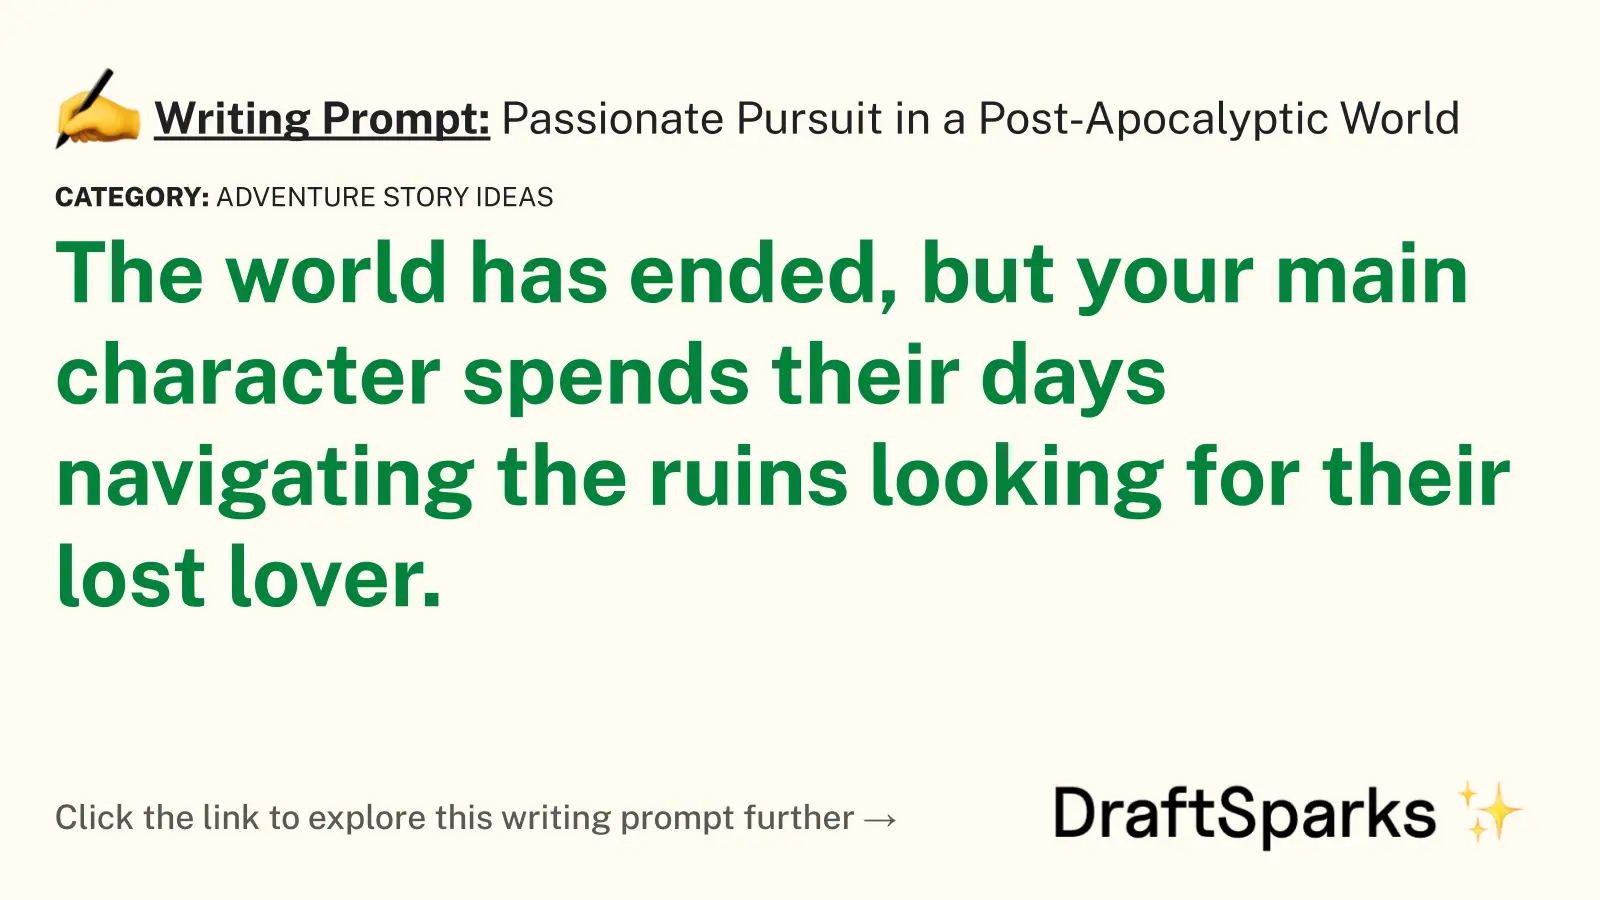 Passionate Pursuit in a Post-Apocalyptic World